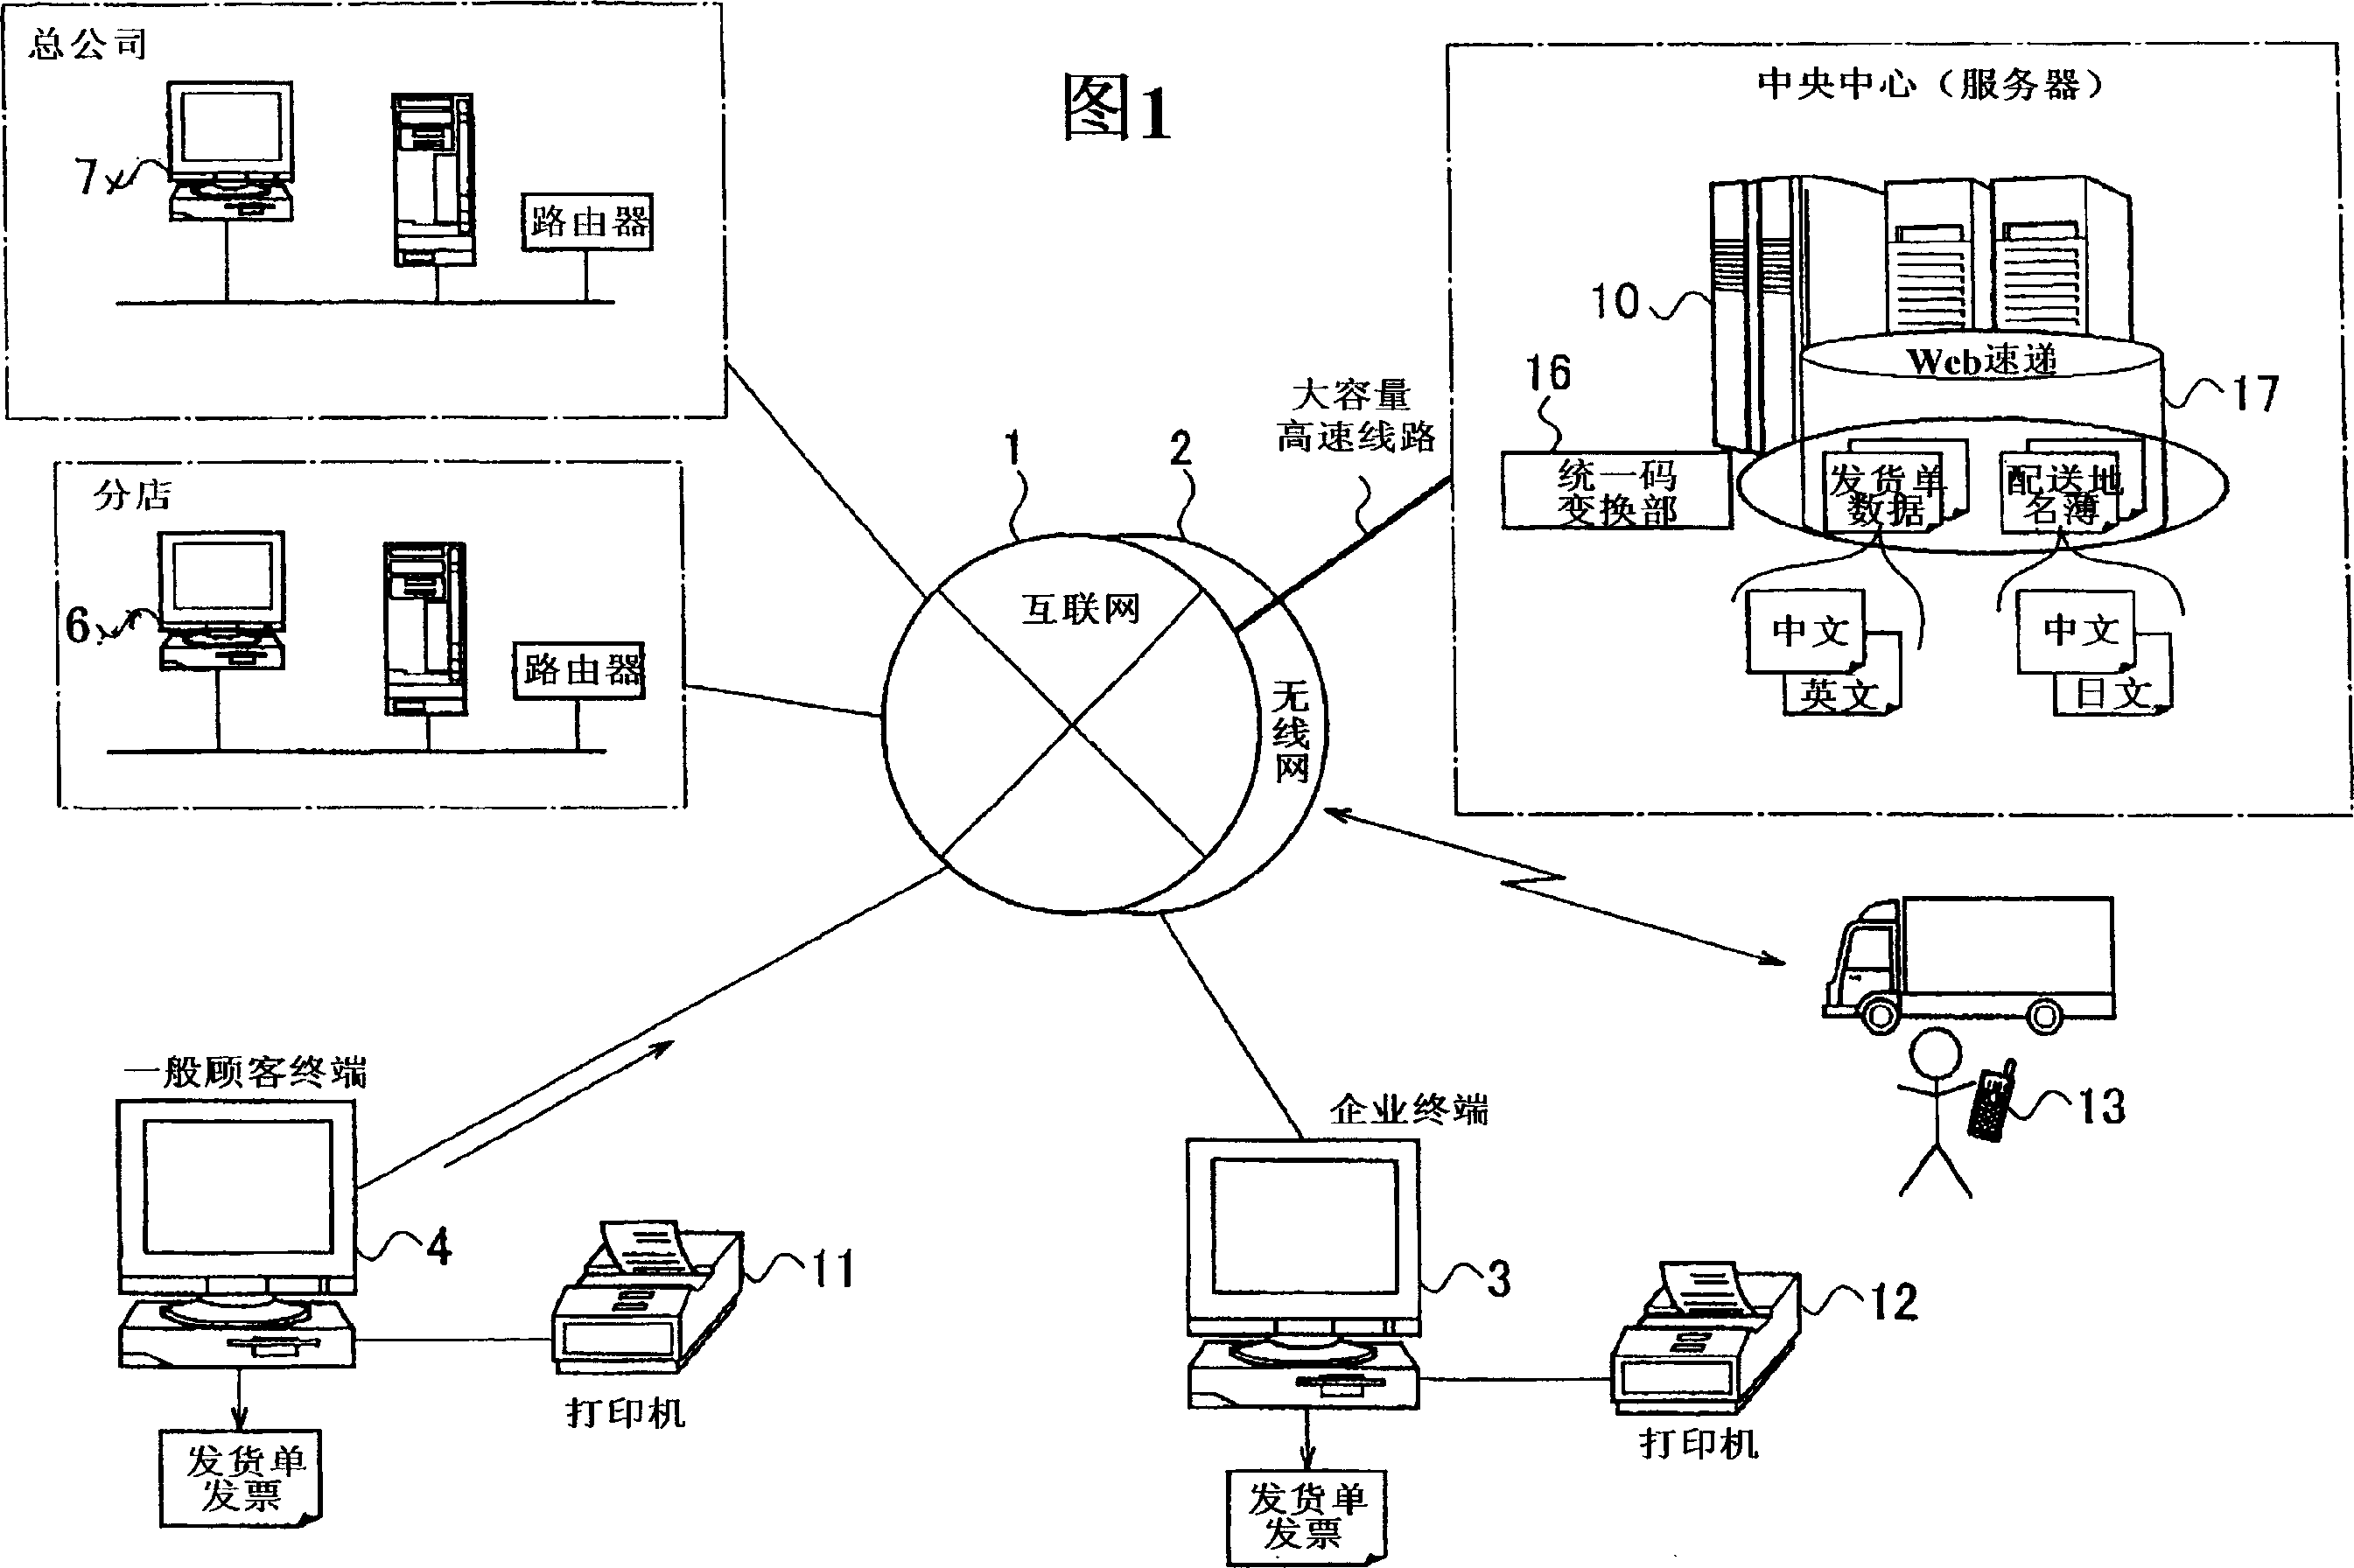 Web goods collecting system with multi-language corresponding function